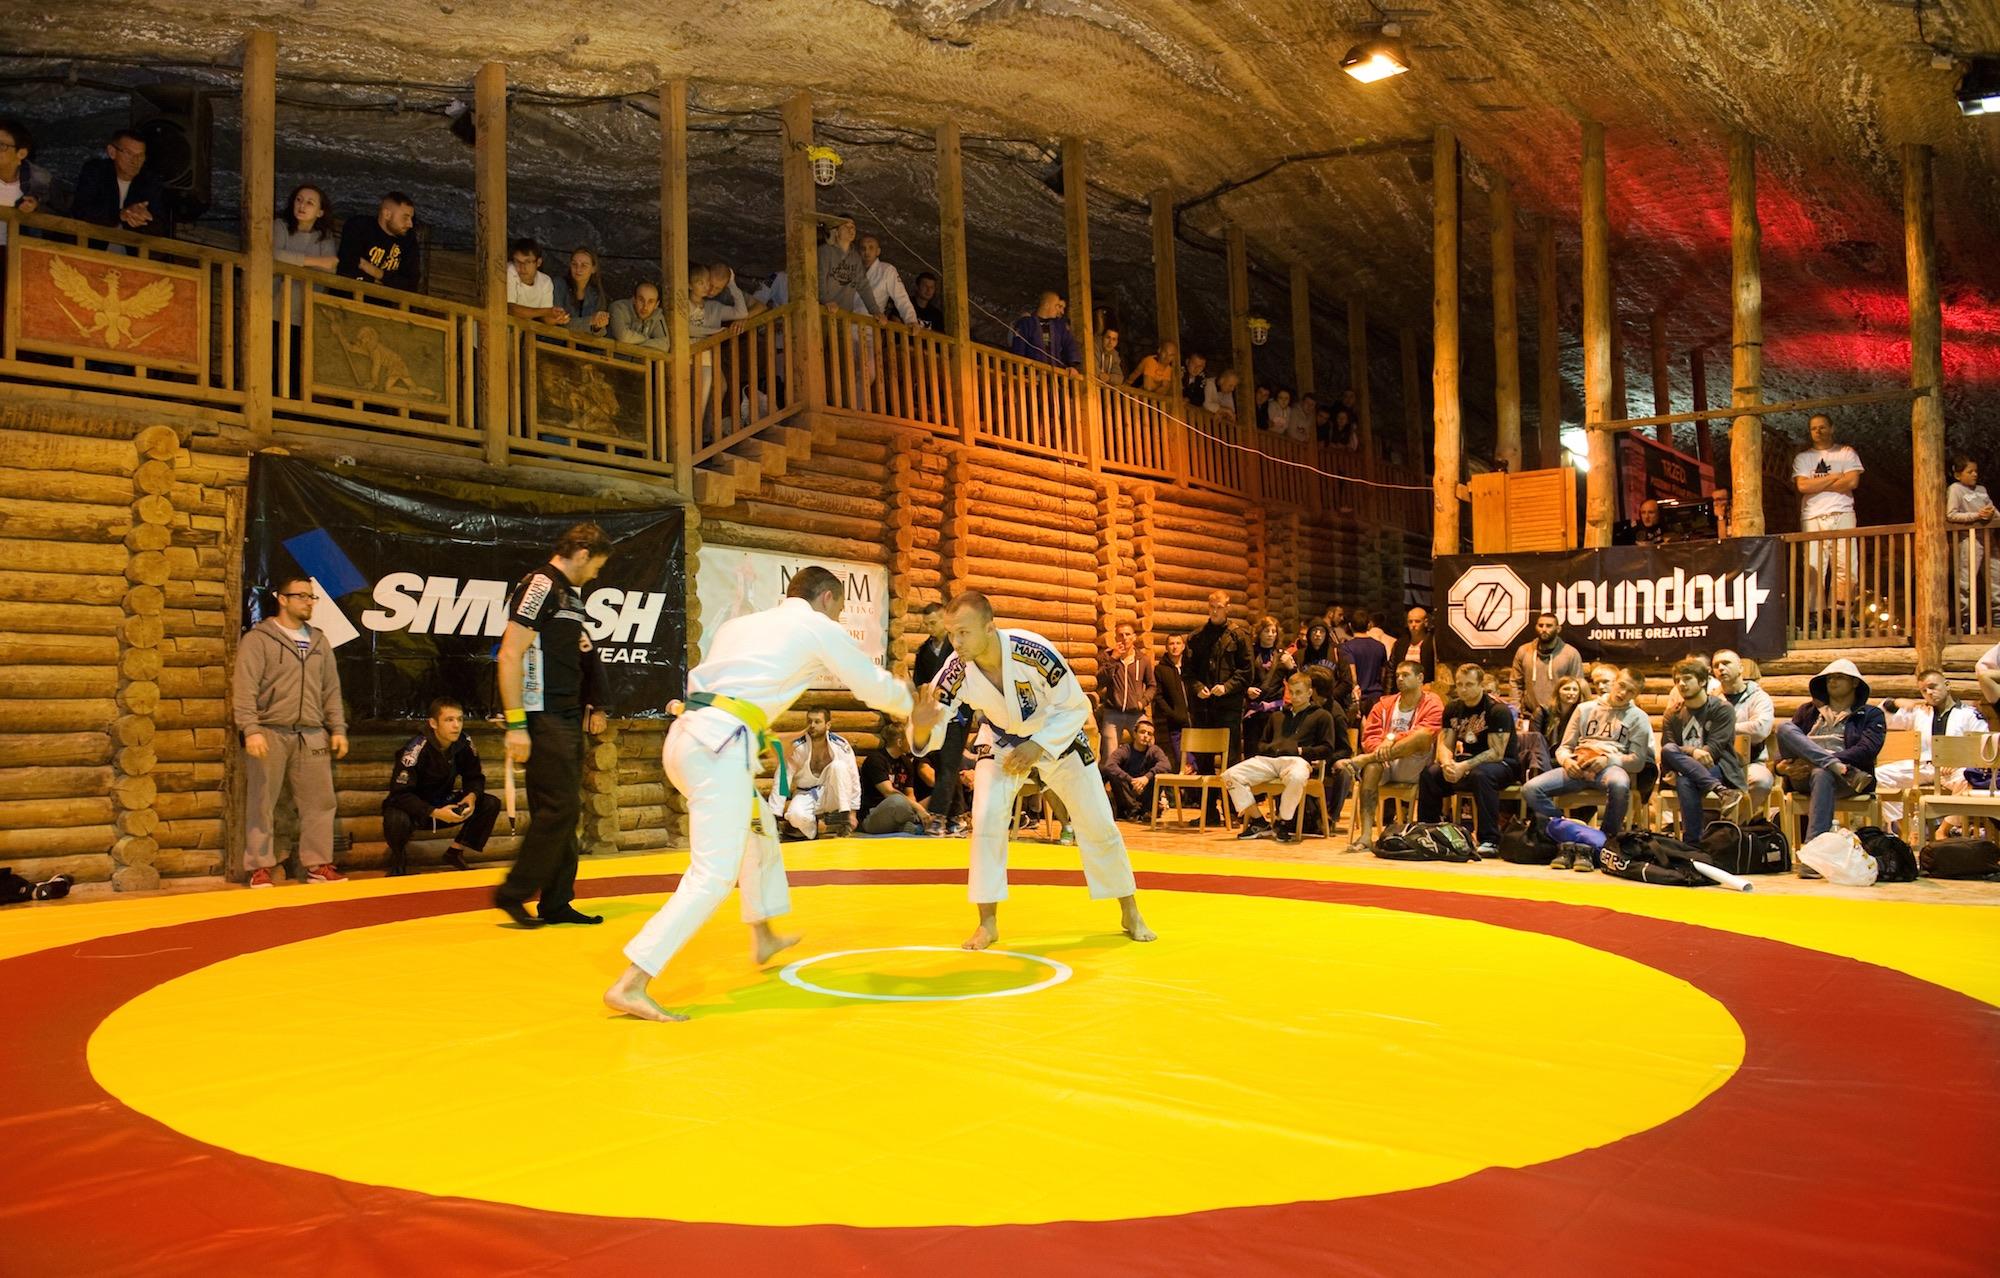 The Ważyn Chamber in the Bochnia Salt Mine provides an excellent arena for sporting competitions, including this international judo competition, as well as a shooting contest, a volleyball tournament, and a spinning marathon. – © Adam Brzoza